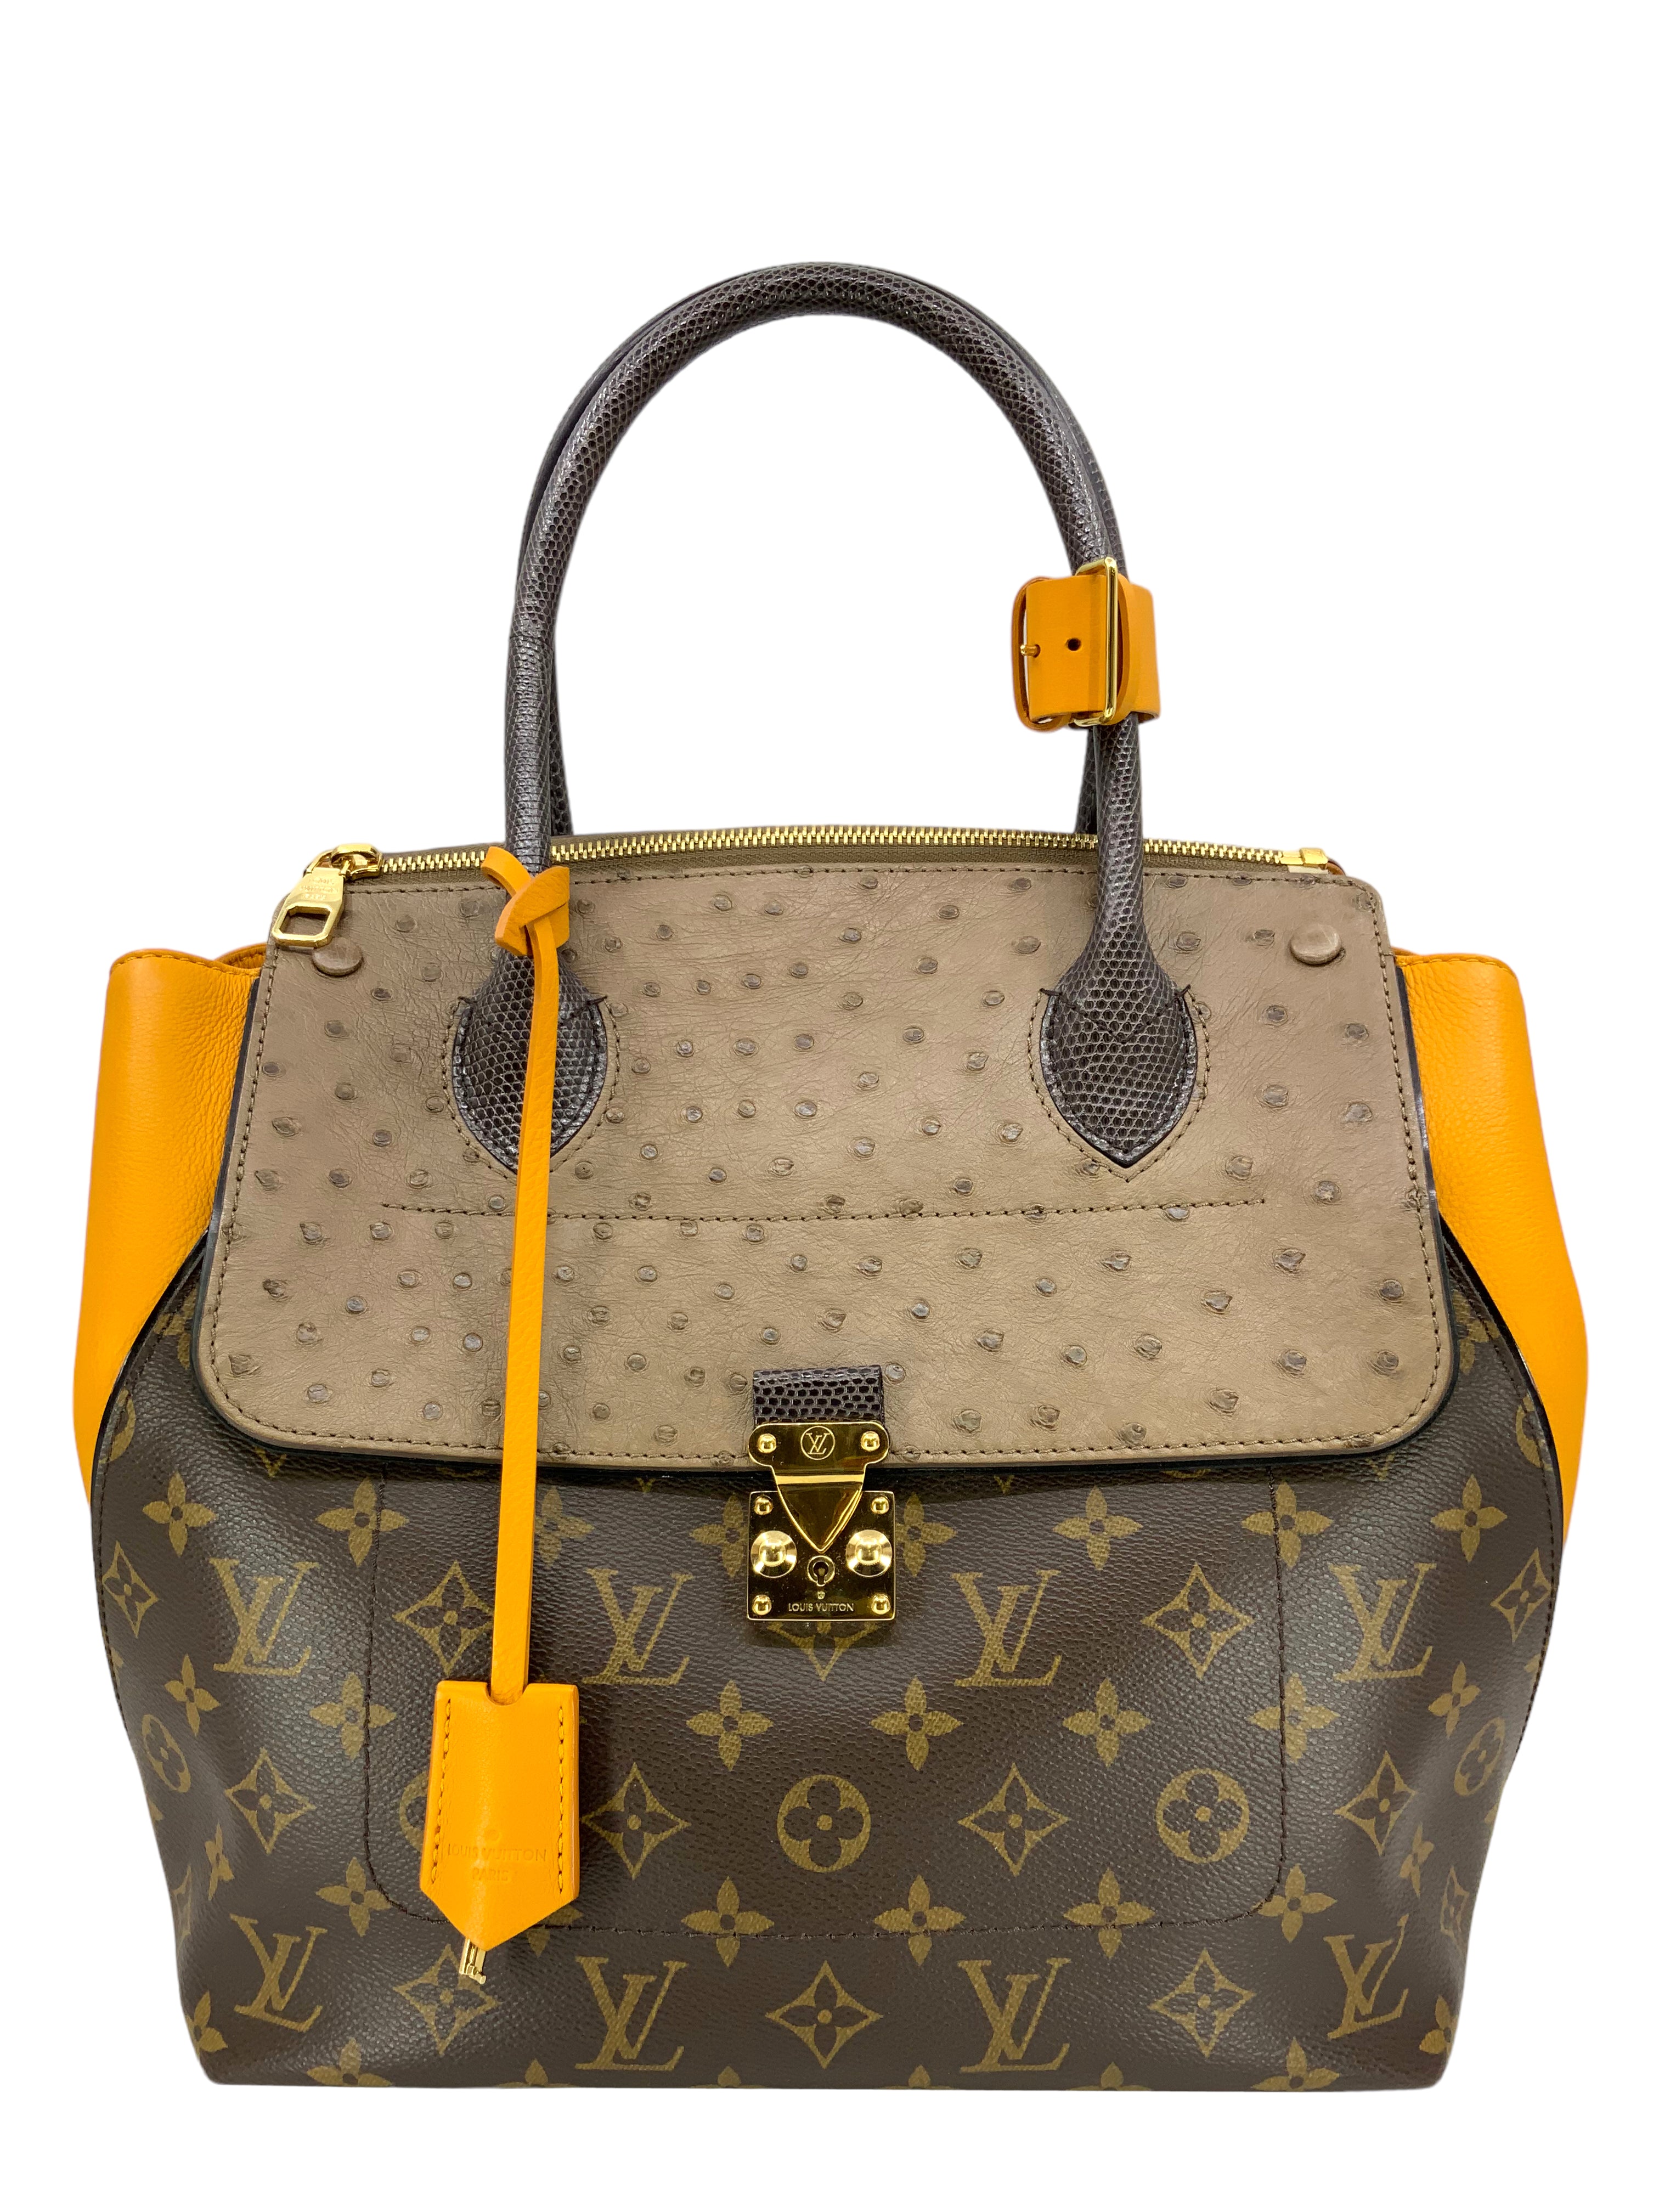 Louis Vuitton Leather Exterior Brown Bags & Handbags for Women, Authenticity Guaranteed